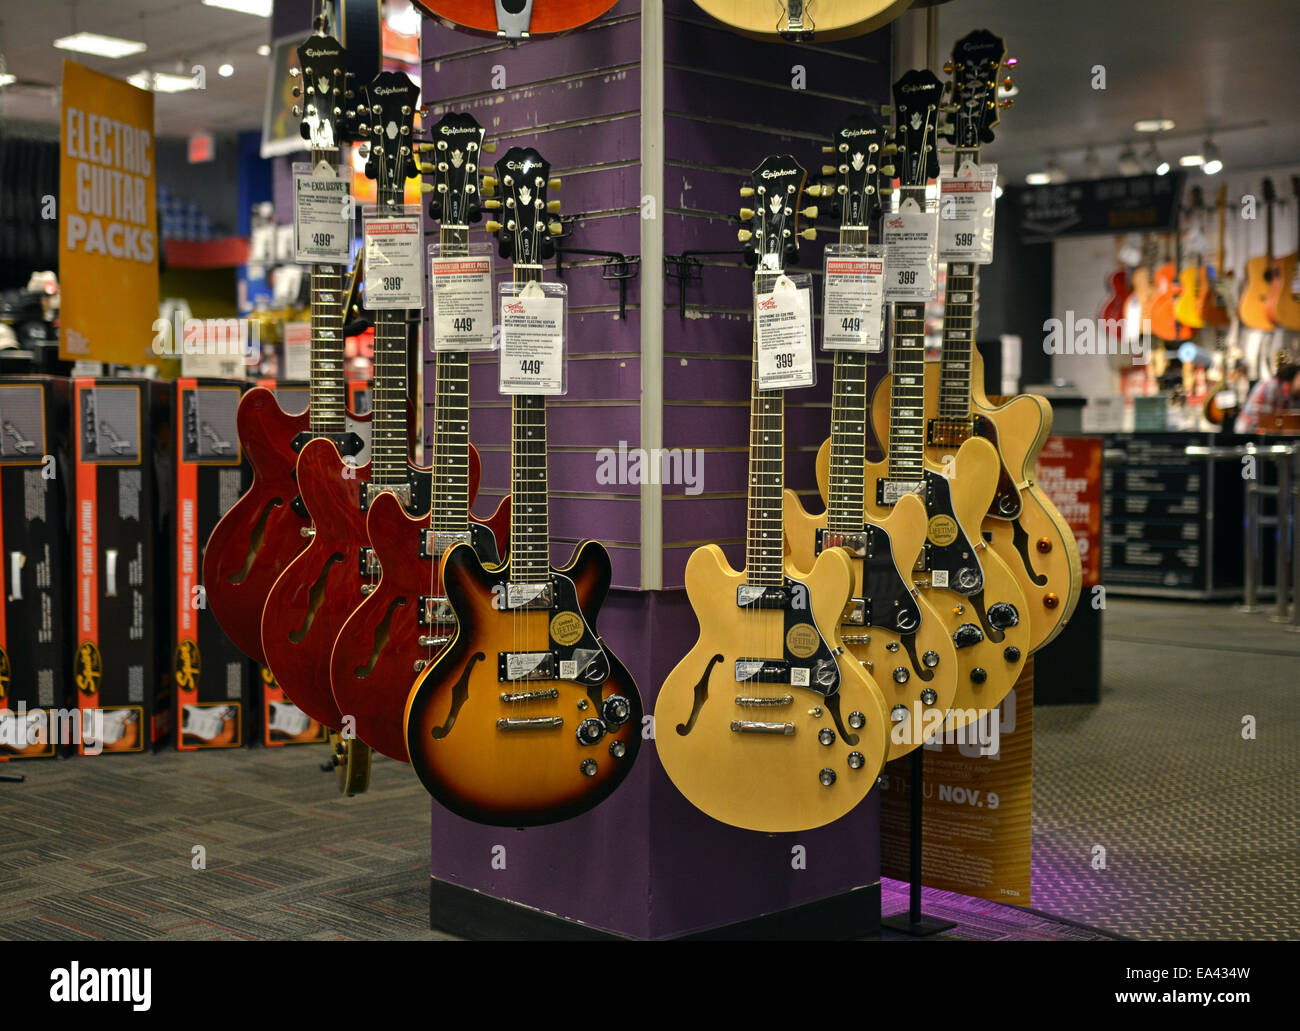 New Epiphone guitars for sale at the Guitar Center on West 14th Street in  Manhattan, New York, City Stock Photo - Alamy